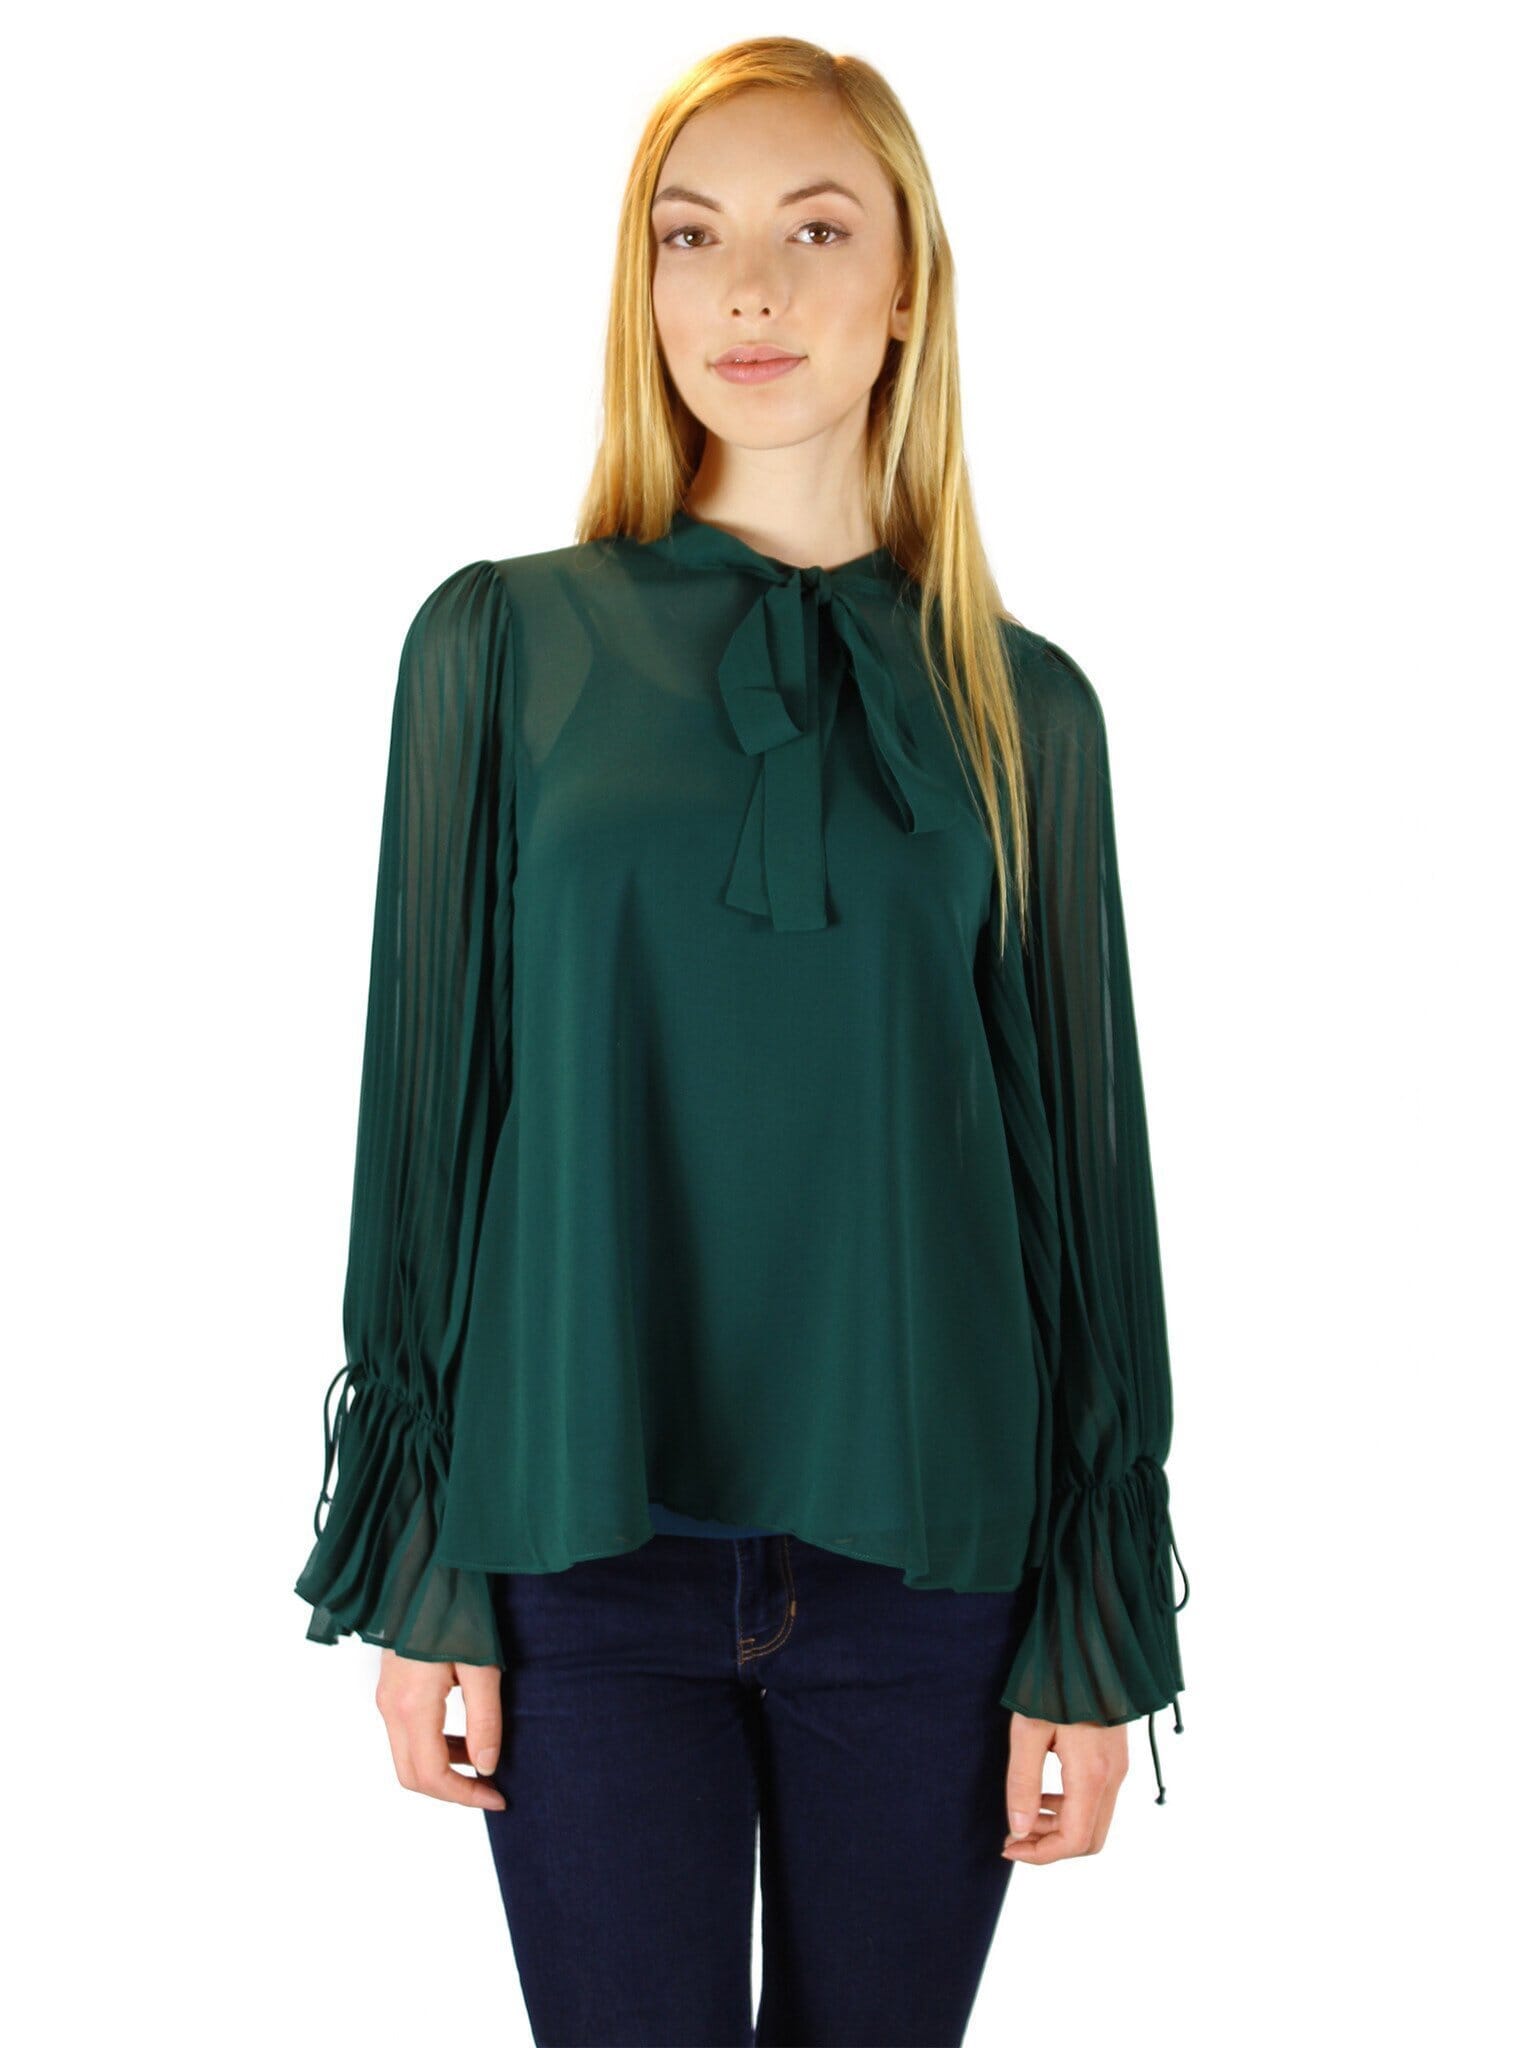 Line & Dot Tautou Tie Shirt in Emerald